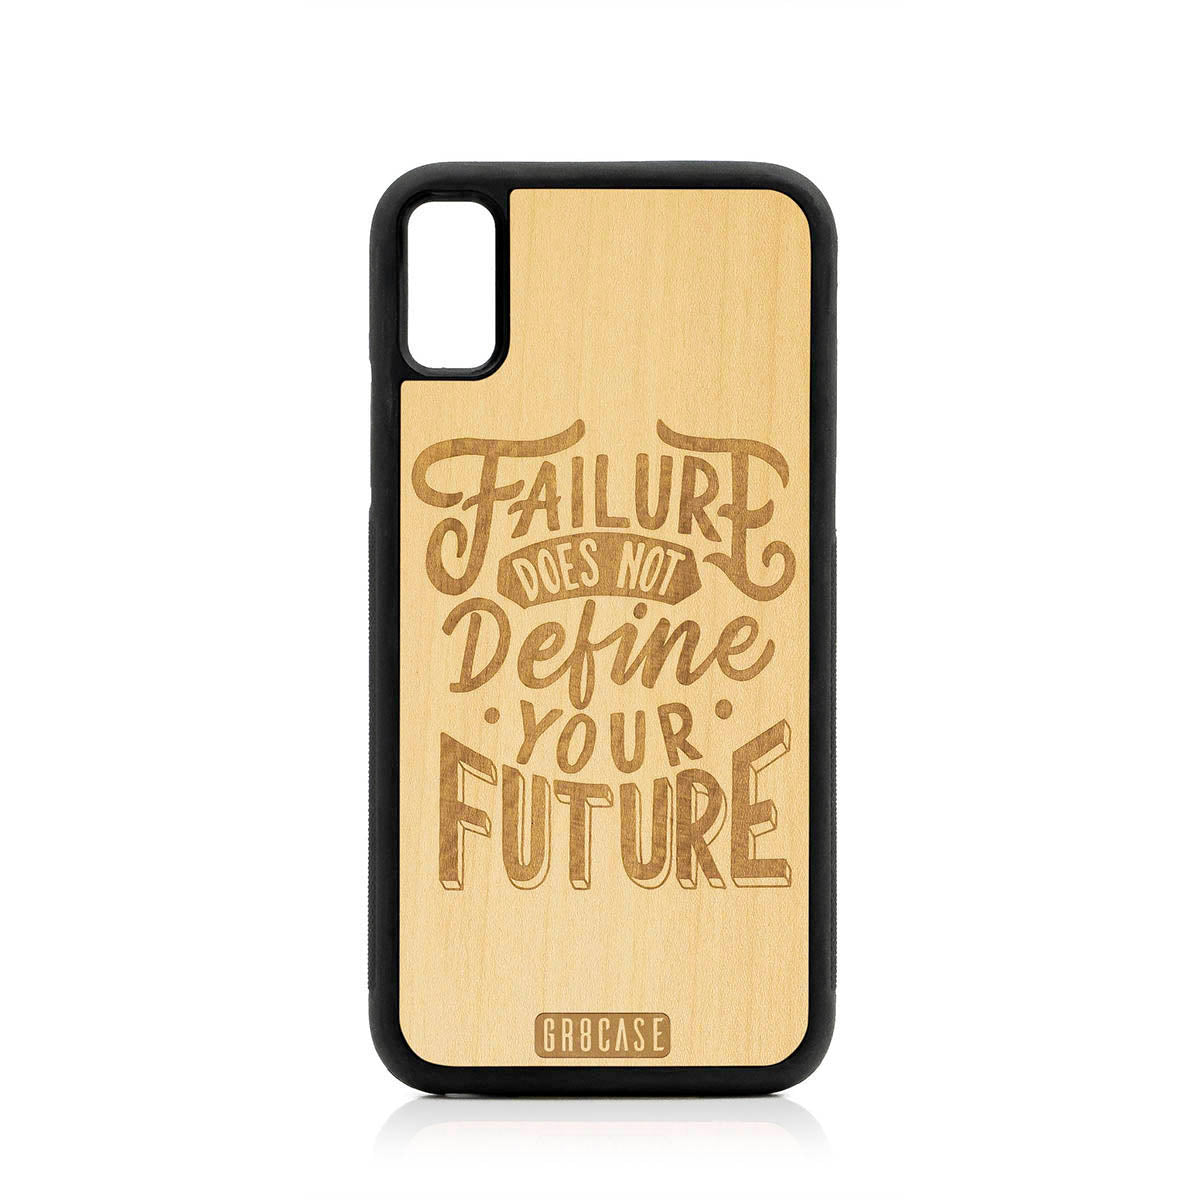 Failure Does Not Define You Future Design Wood Case For iPhone XS Max by GR8CASE